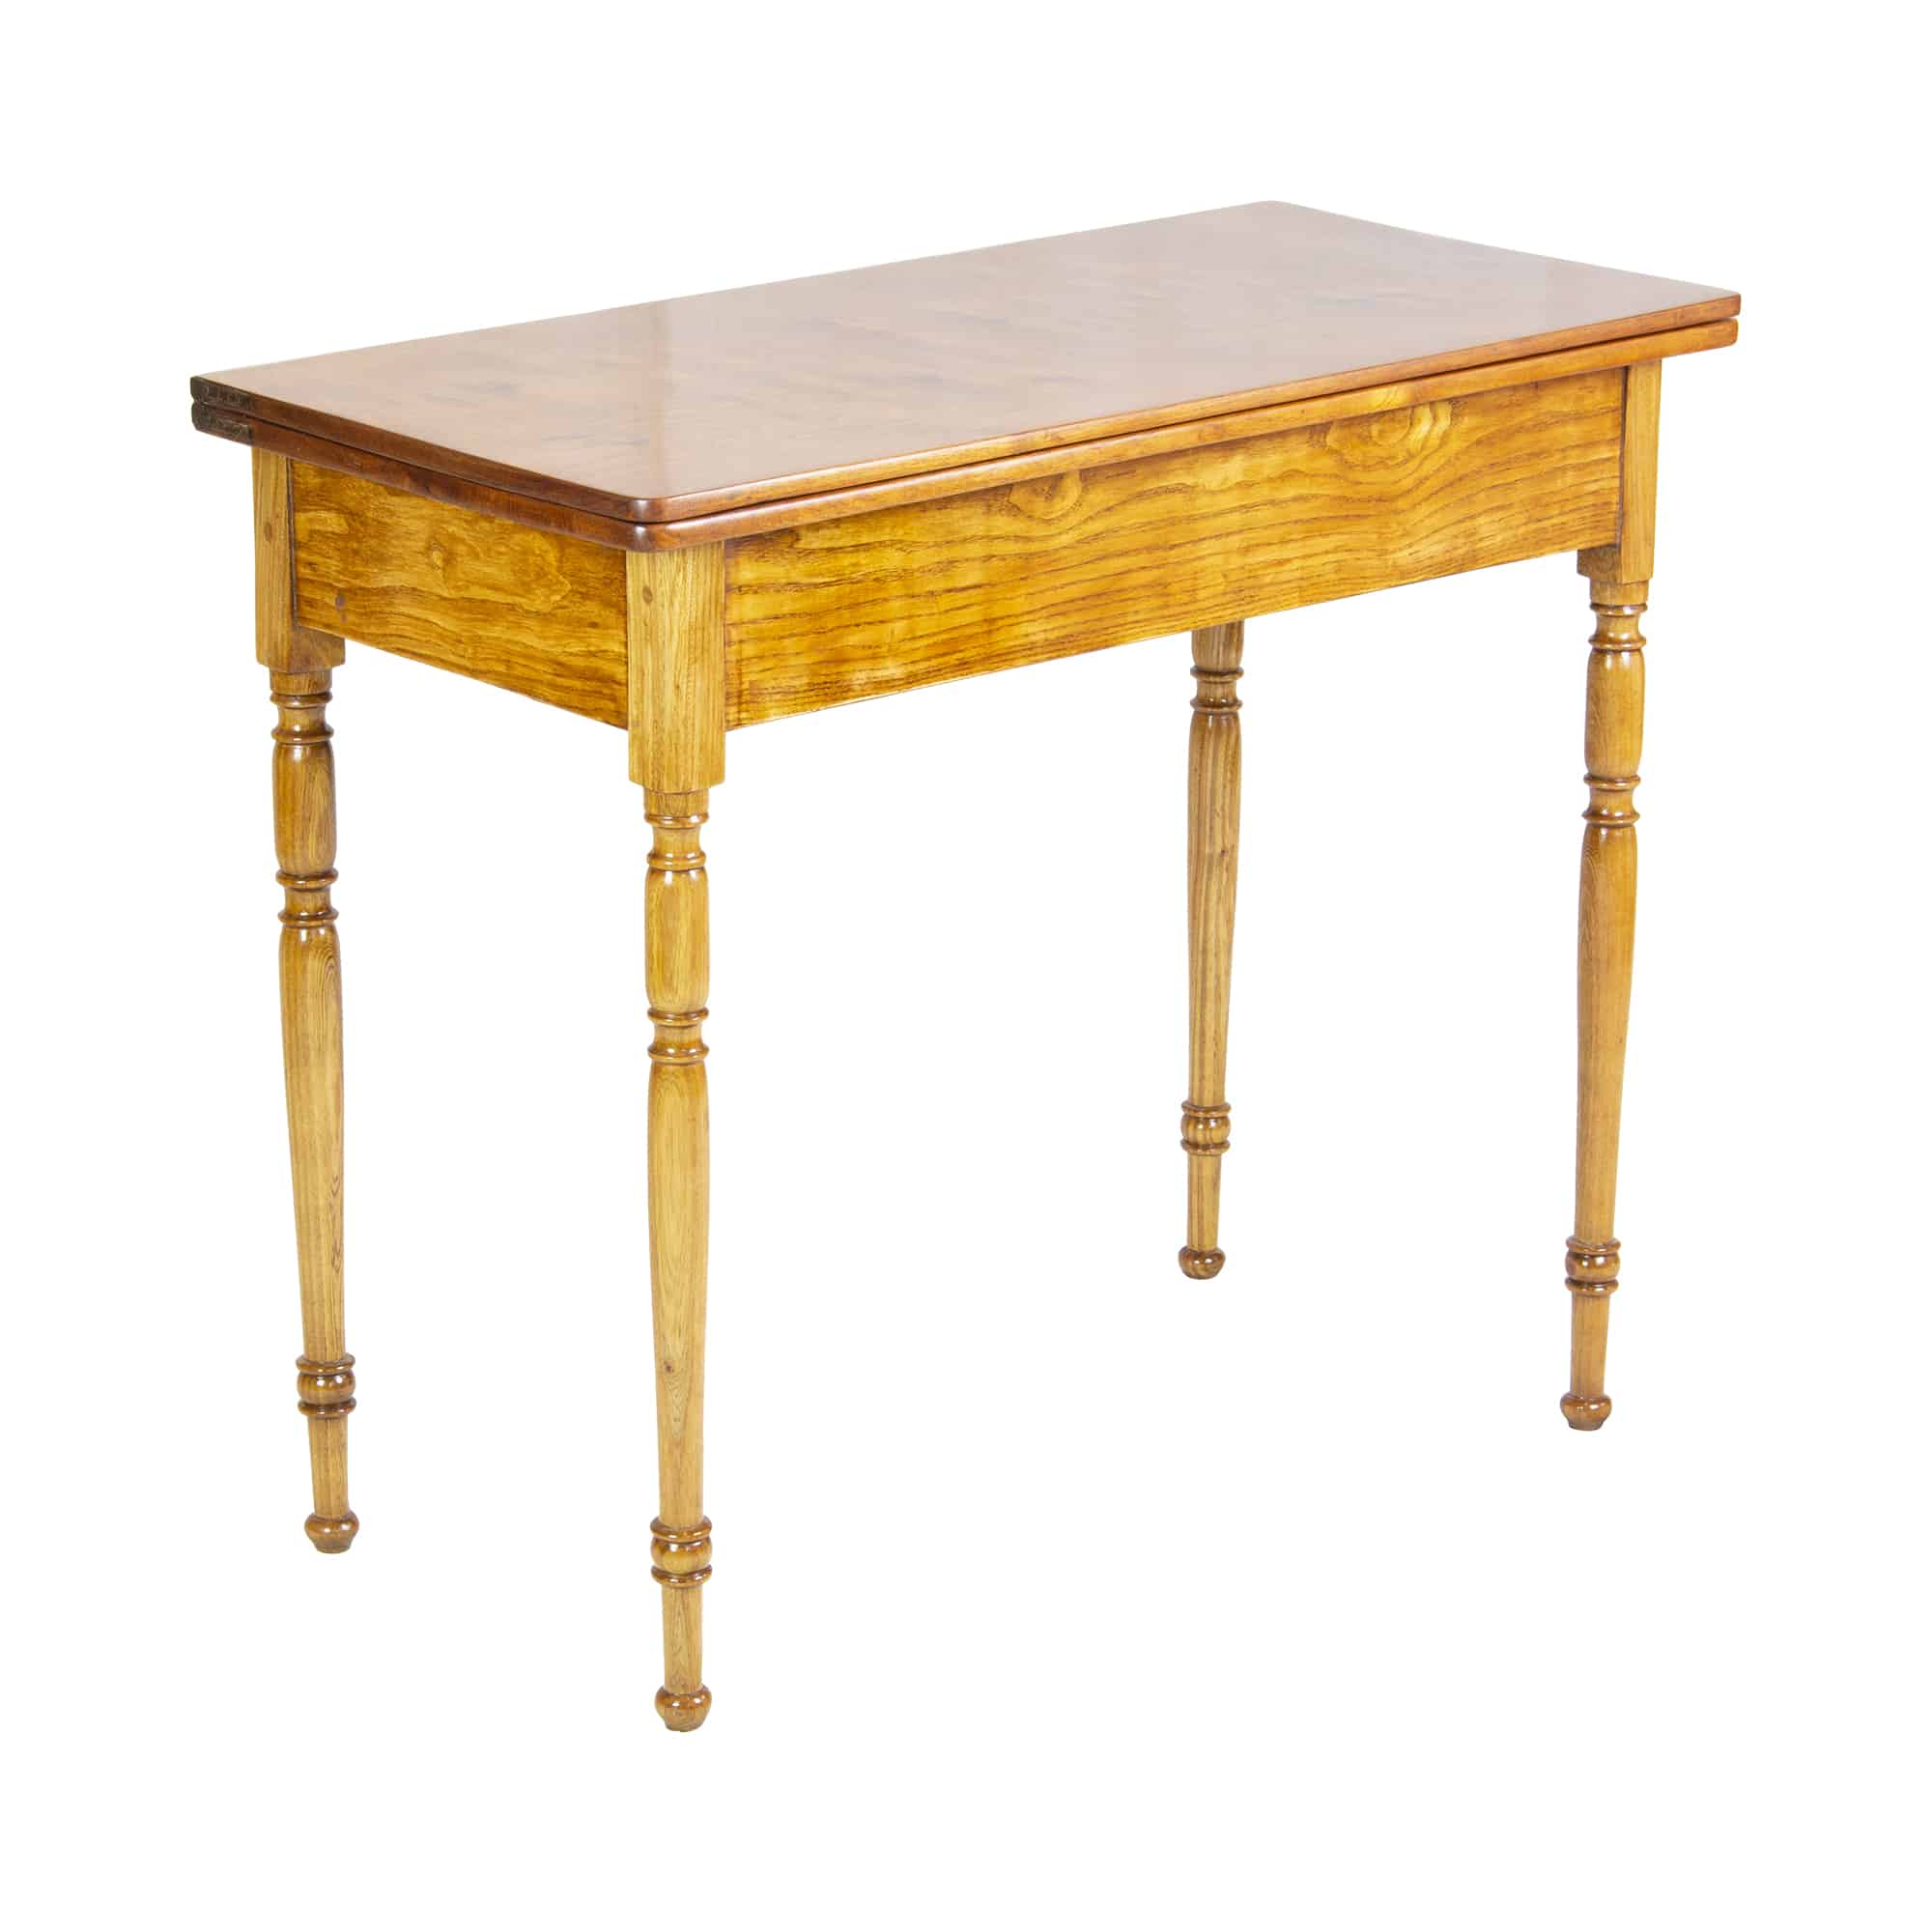 Not Just a Sidekick: Antique Side Tables, Center Stage